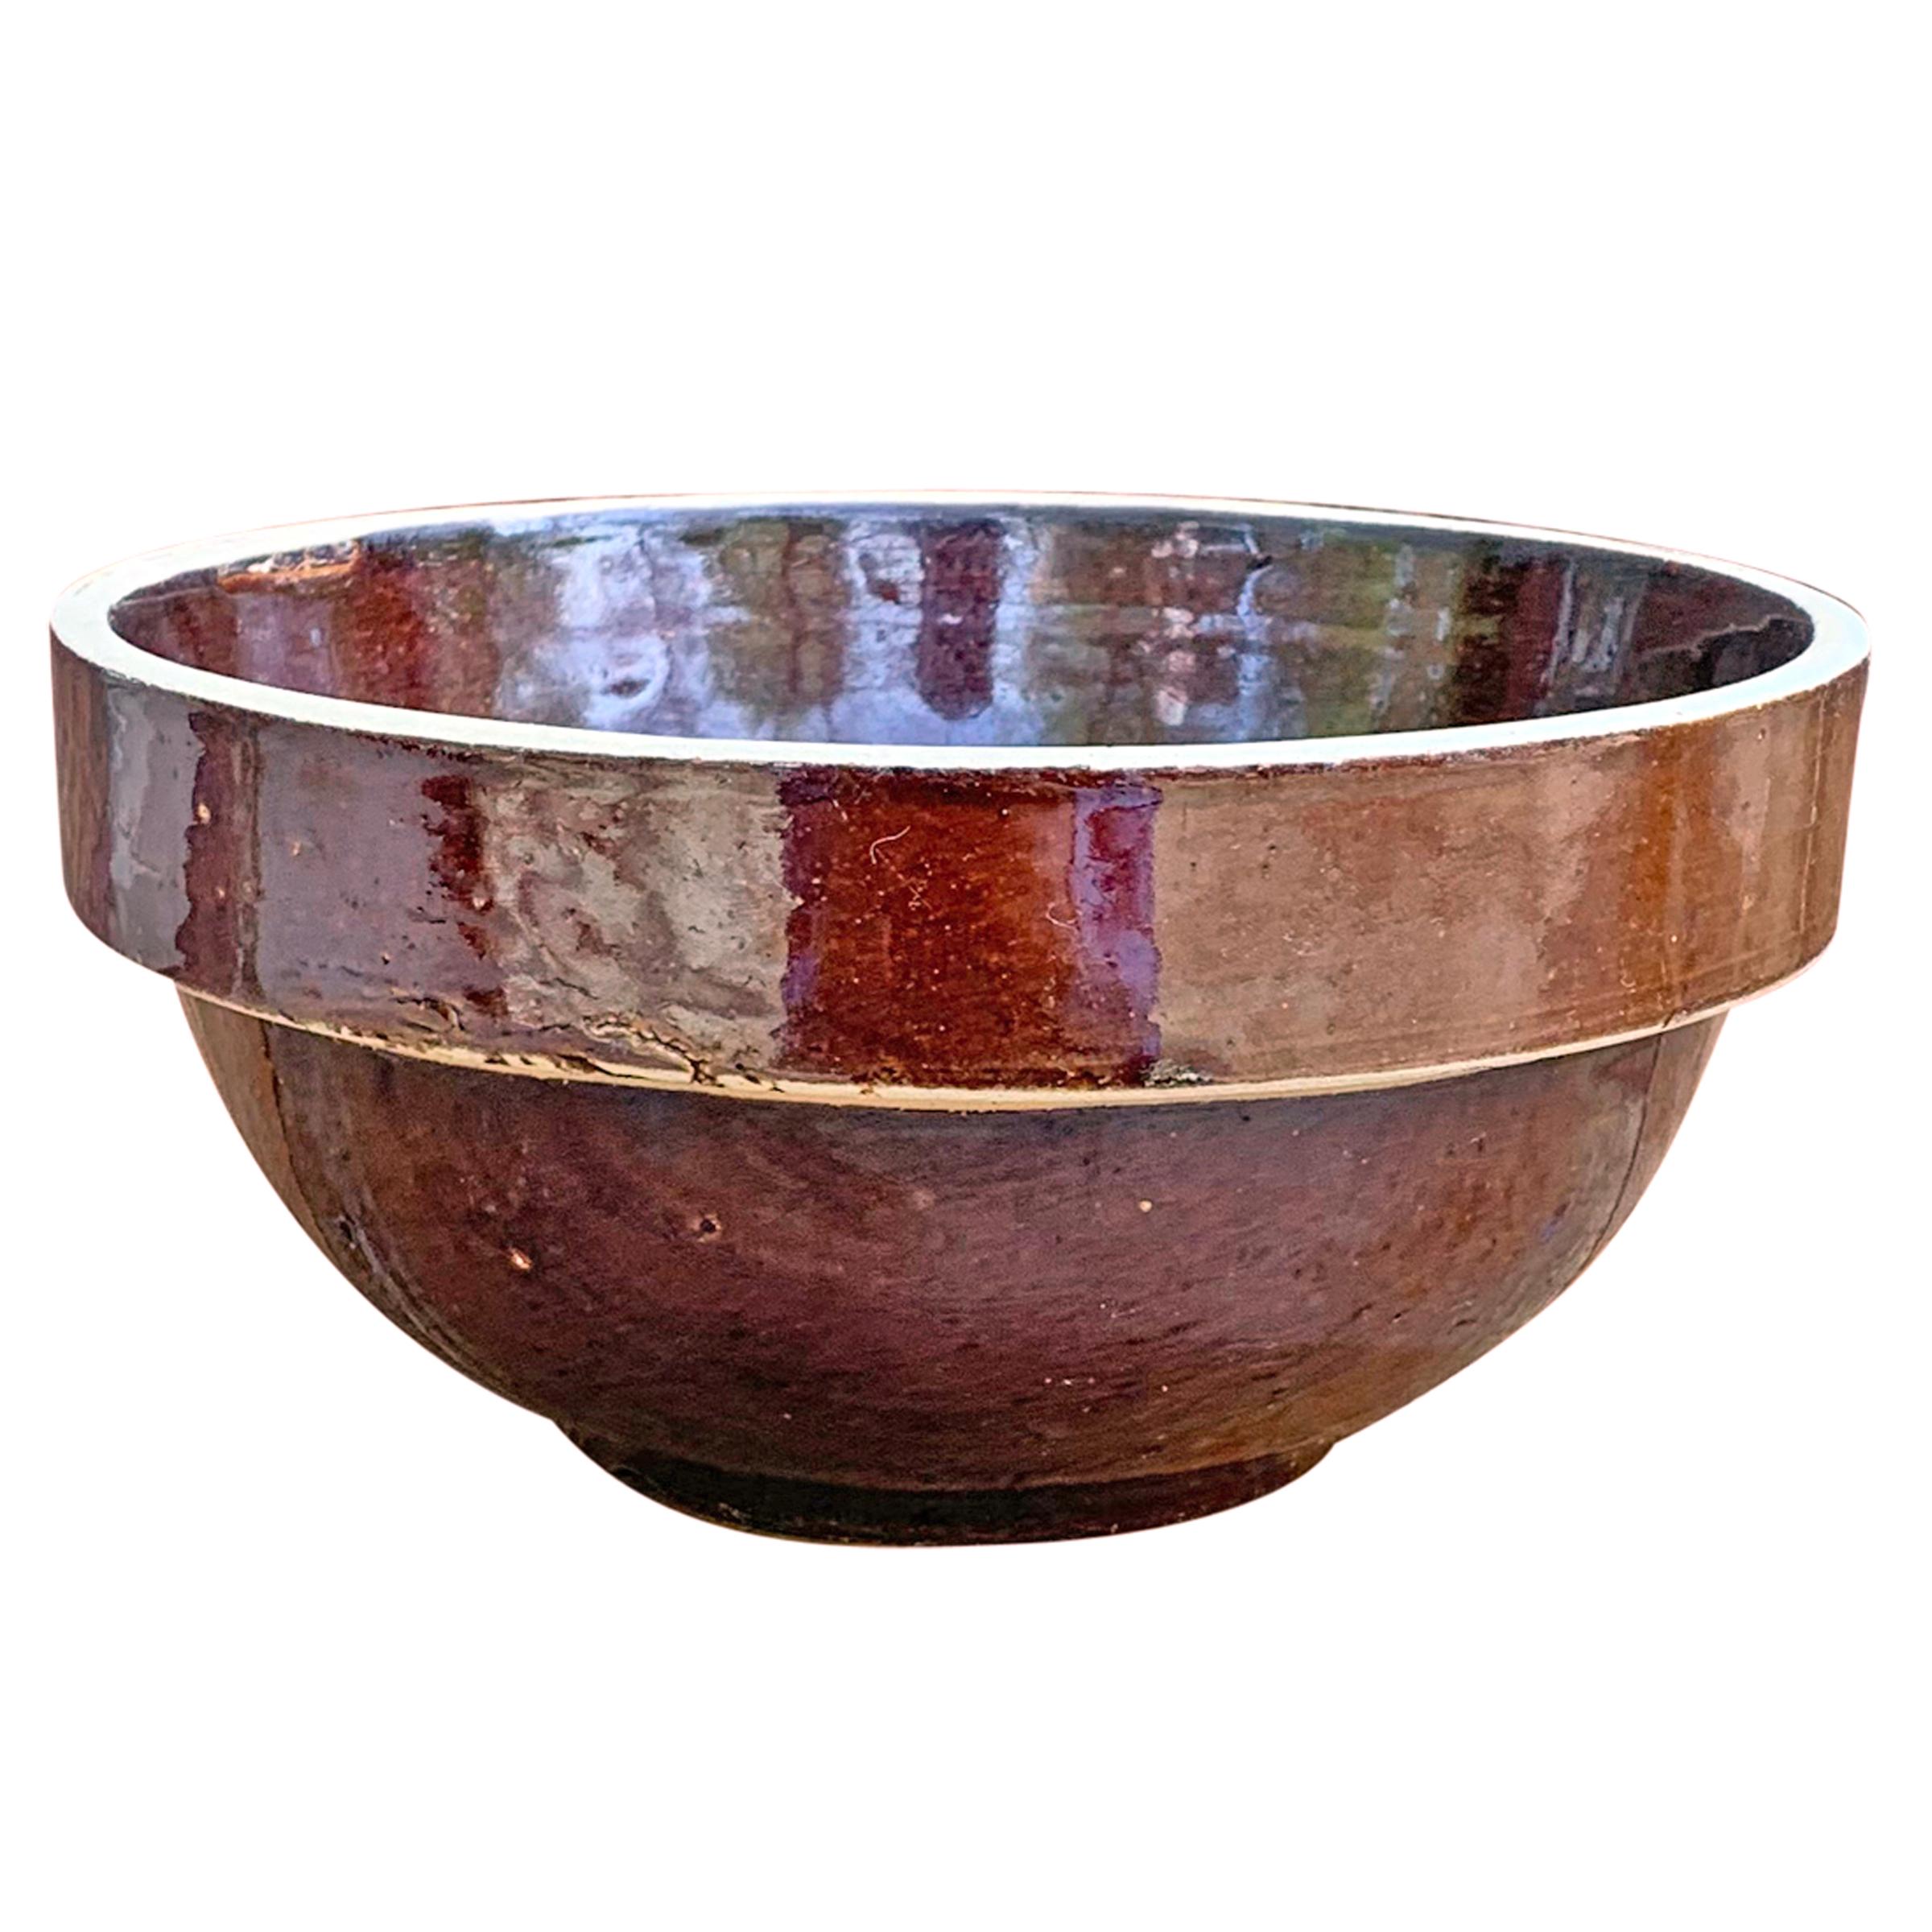 A lovely assembled set of six early 20th century American glazed stoneware mixing bowls of simple, but sophisticated, forms in varied brown and grey colors. The extra large bowl is marked, 